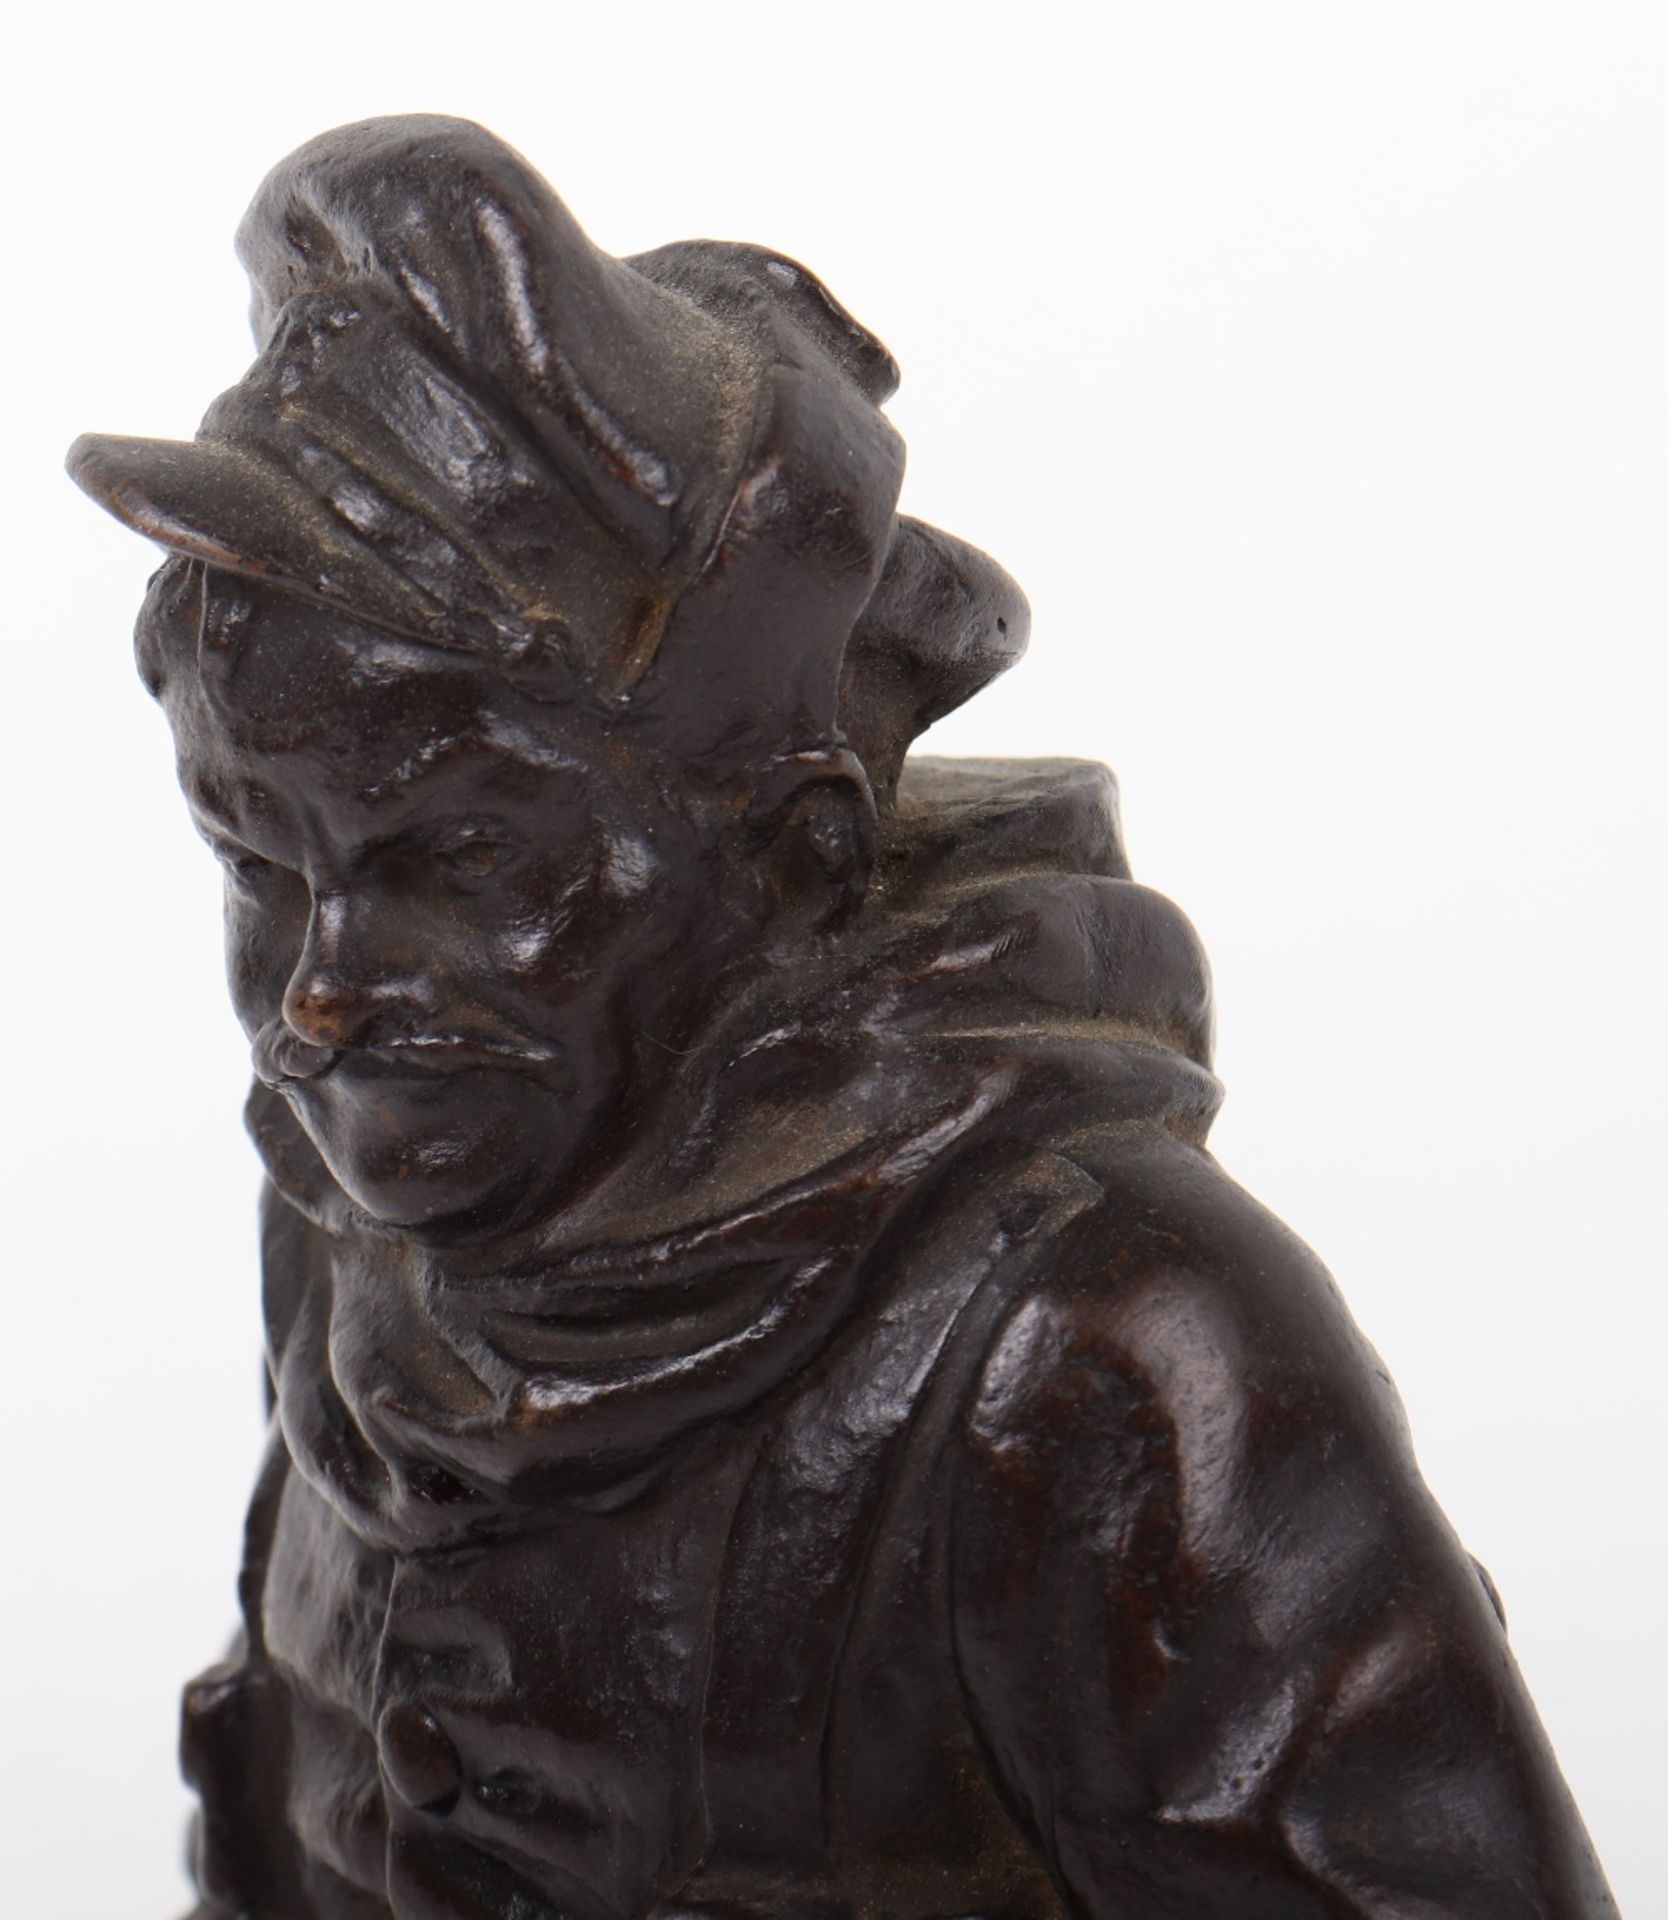 Bronze Figure of a WW1 British Tommy in the Bruce Bairnsfather “Old Bill” Style - Image 6 of 8